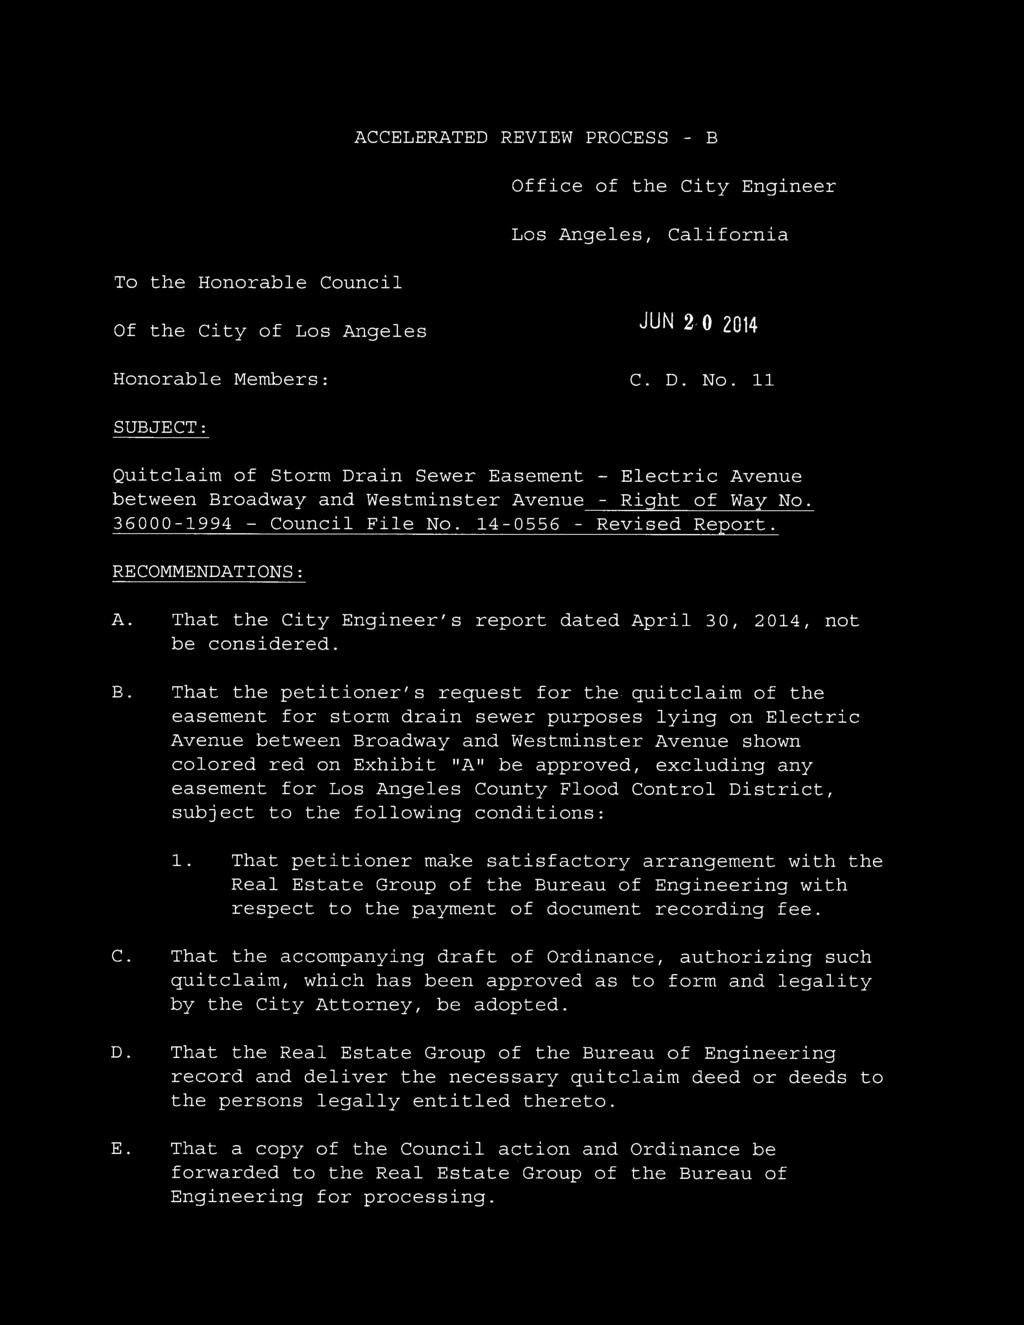 RECOMMENDATIONS: A. That the City Engineer's report dated April 30, 2014, not be considered. B.